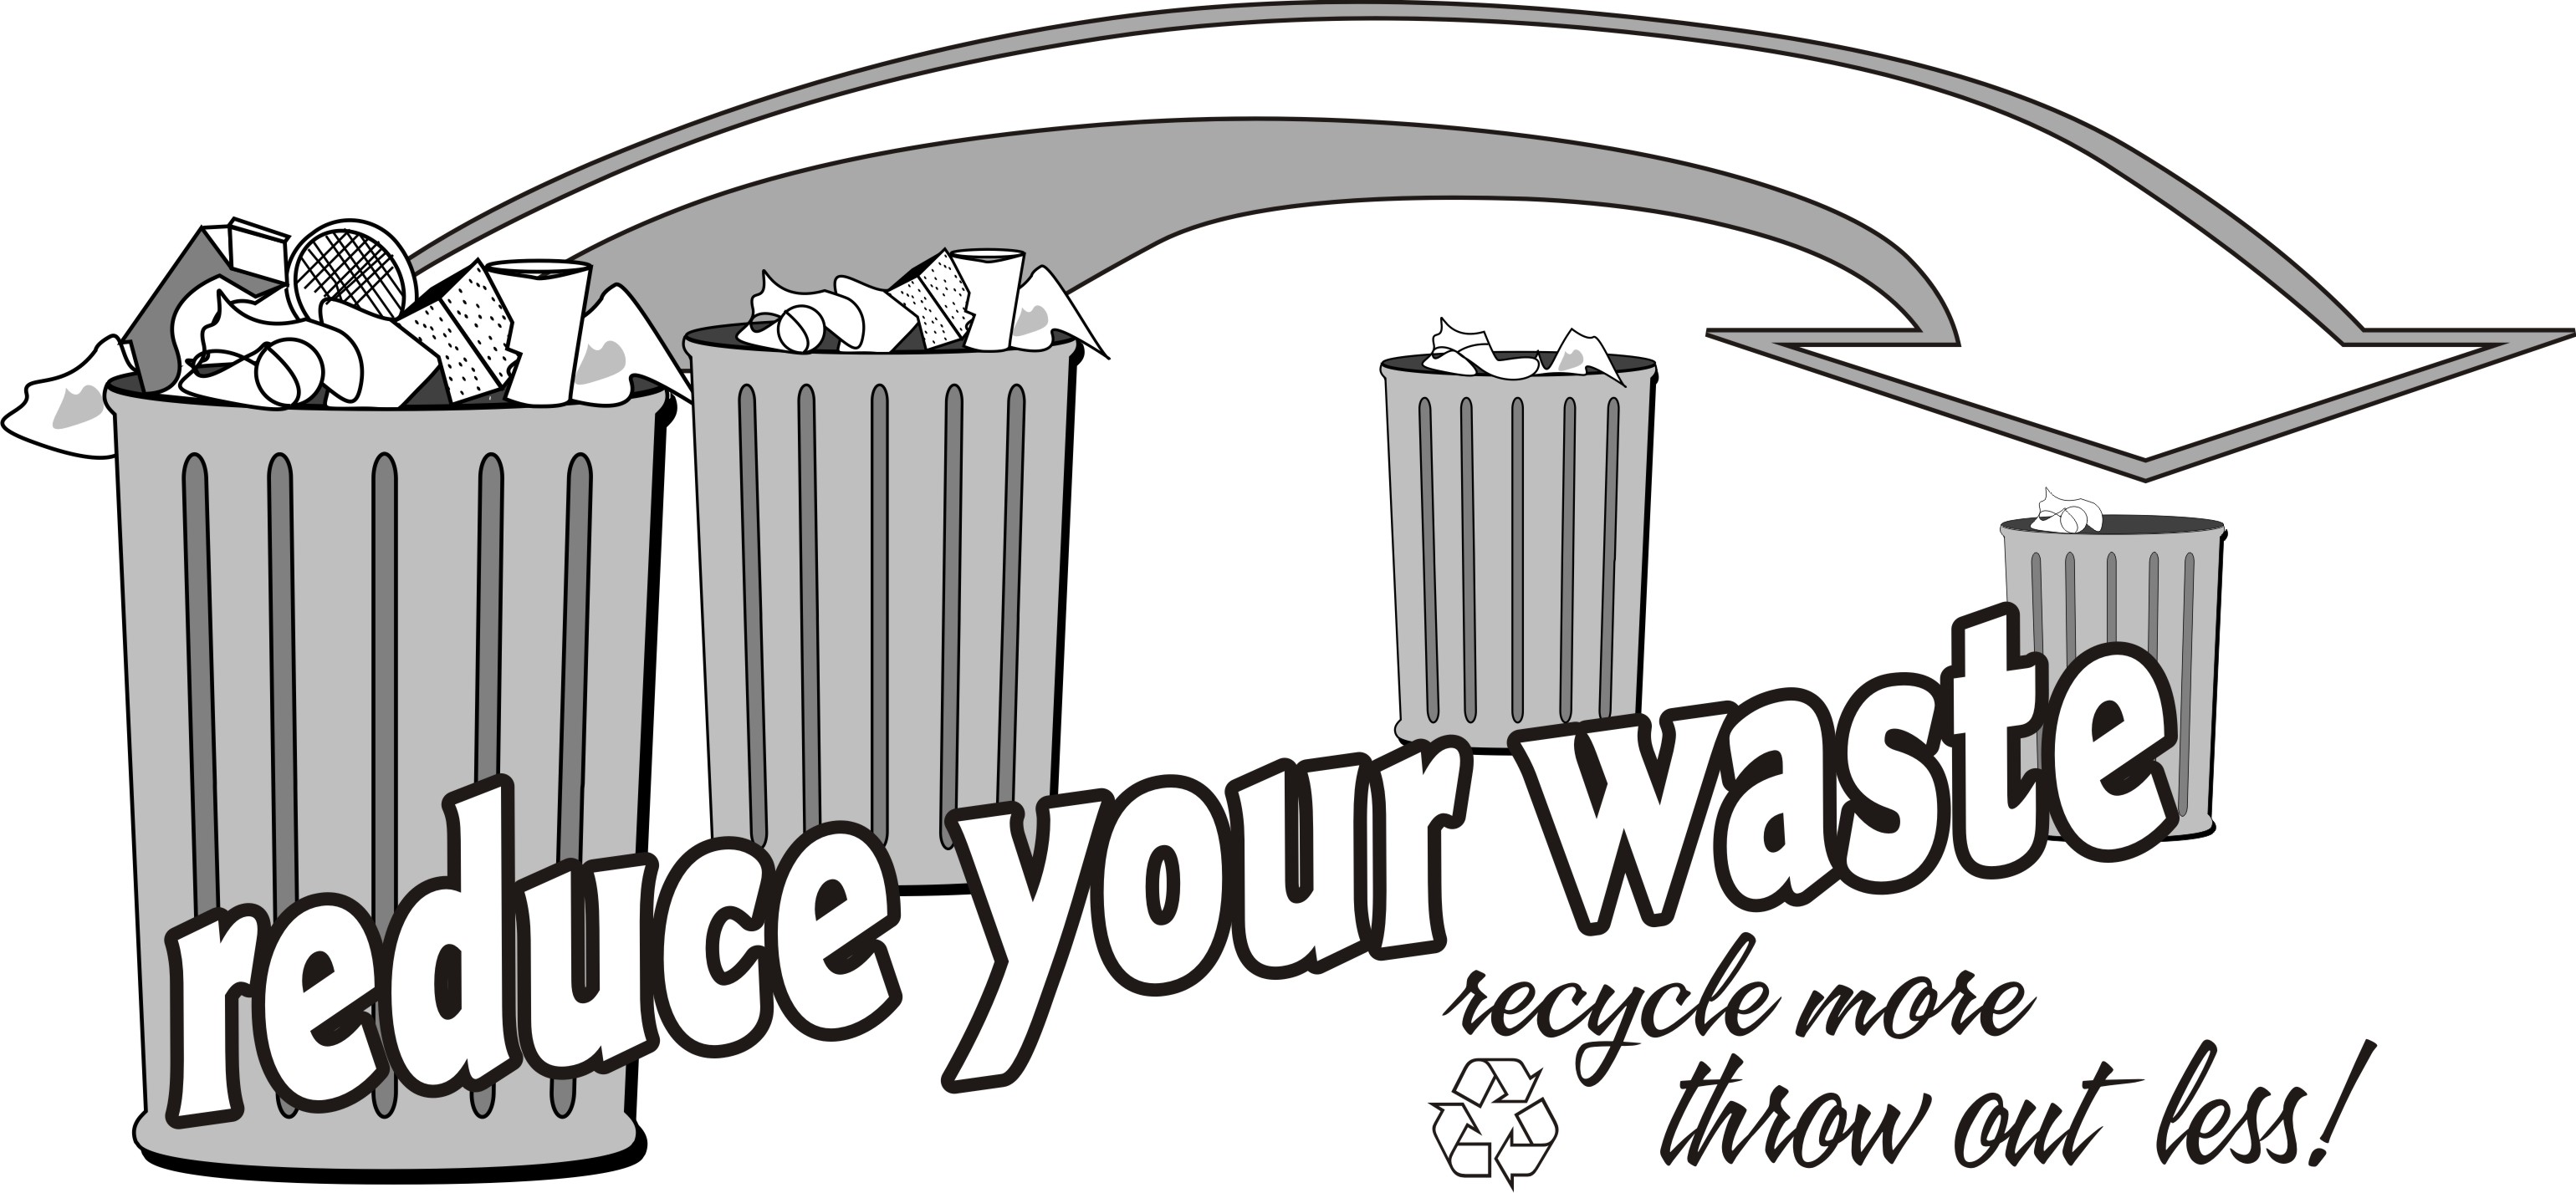 Reduce your waste